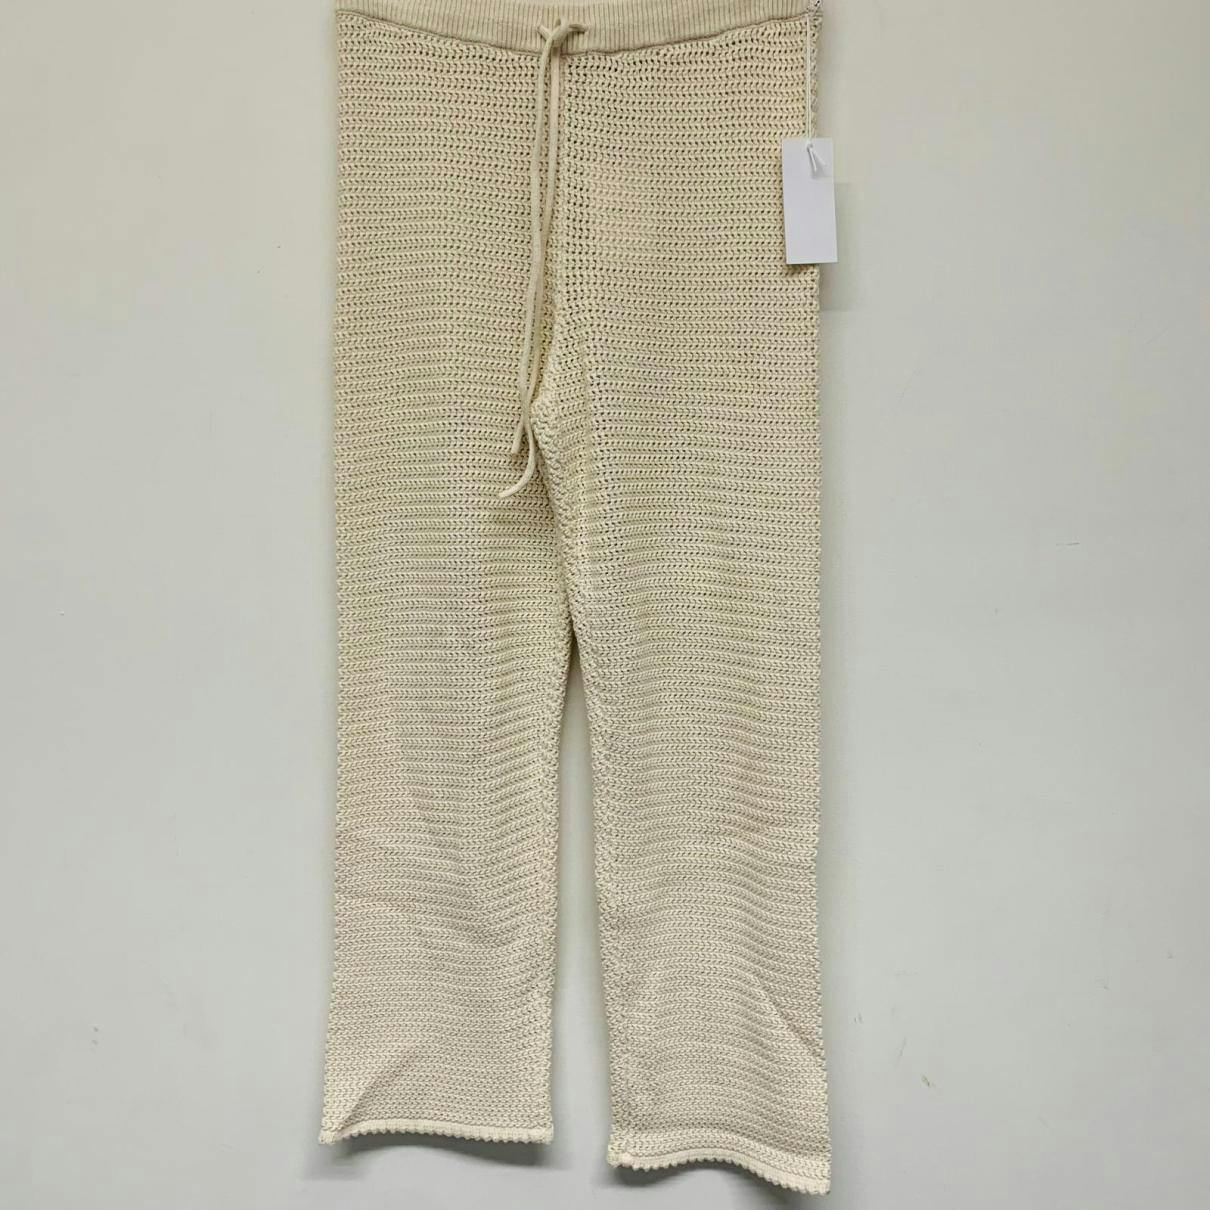 https://images.vestiairecollective.com/cdn-cgi/image/q=75,f=auto,/produit/white-synthetic-reformation-trousers-35136158-4_2.jpg?secret=VC-e9eee96a-a819-4431-ad12-d066be2626ef